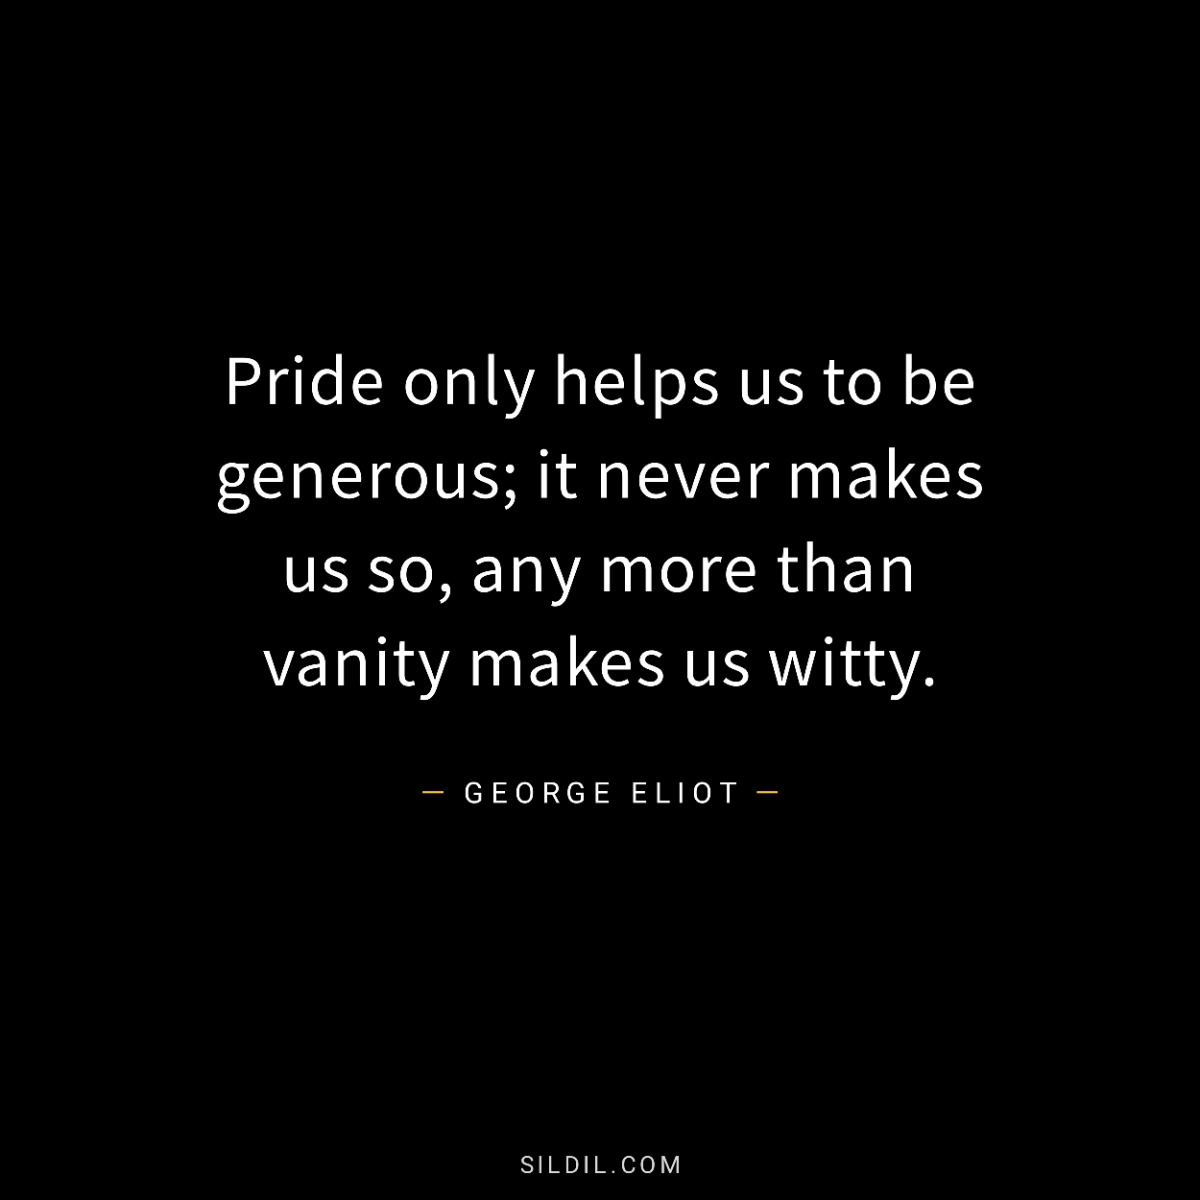 Pride only helps us to be generous; it never makes us so, any more than vanity makes us witty.